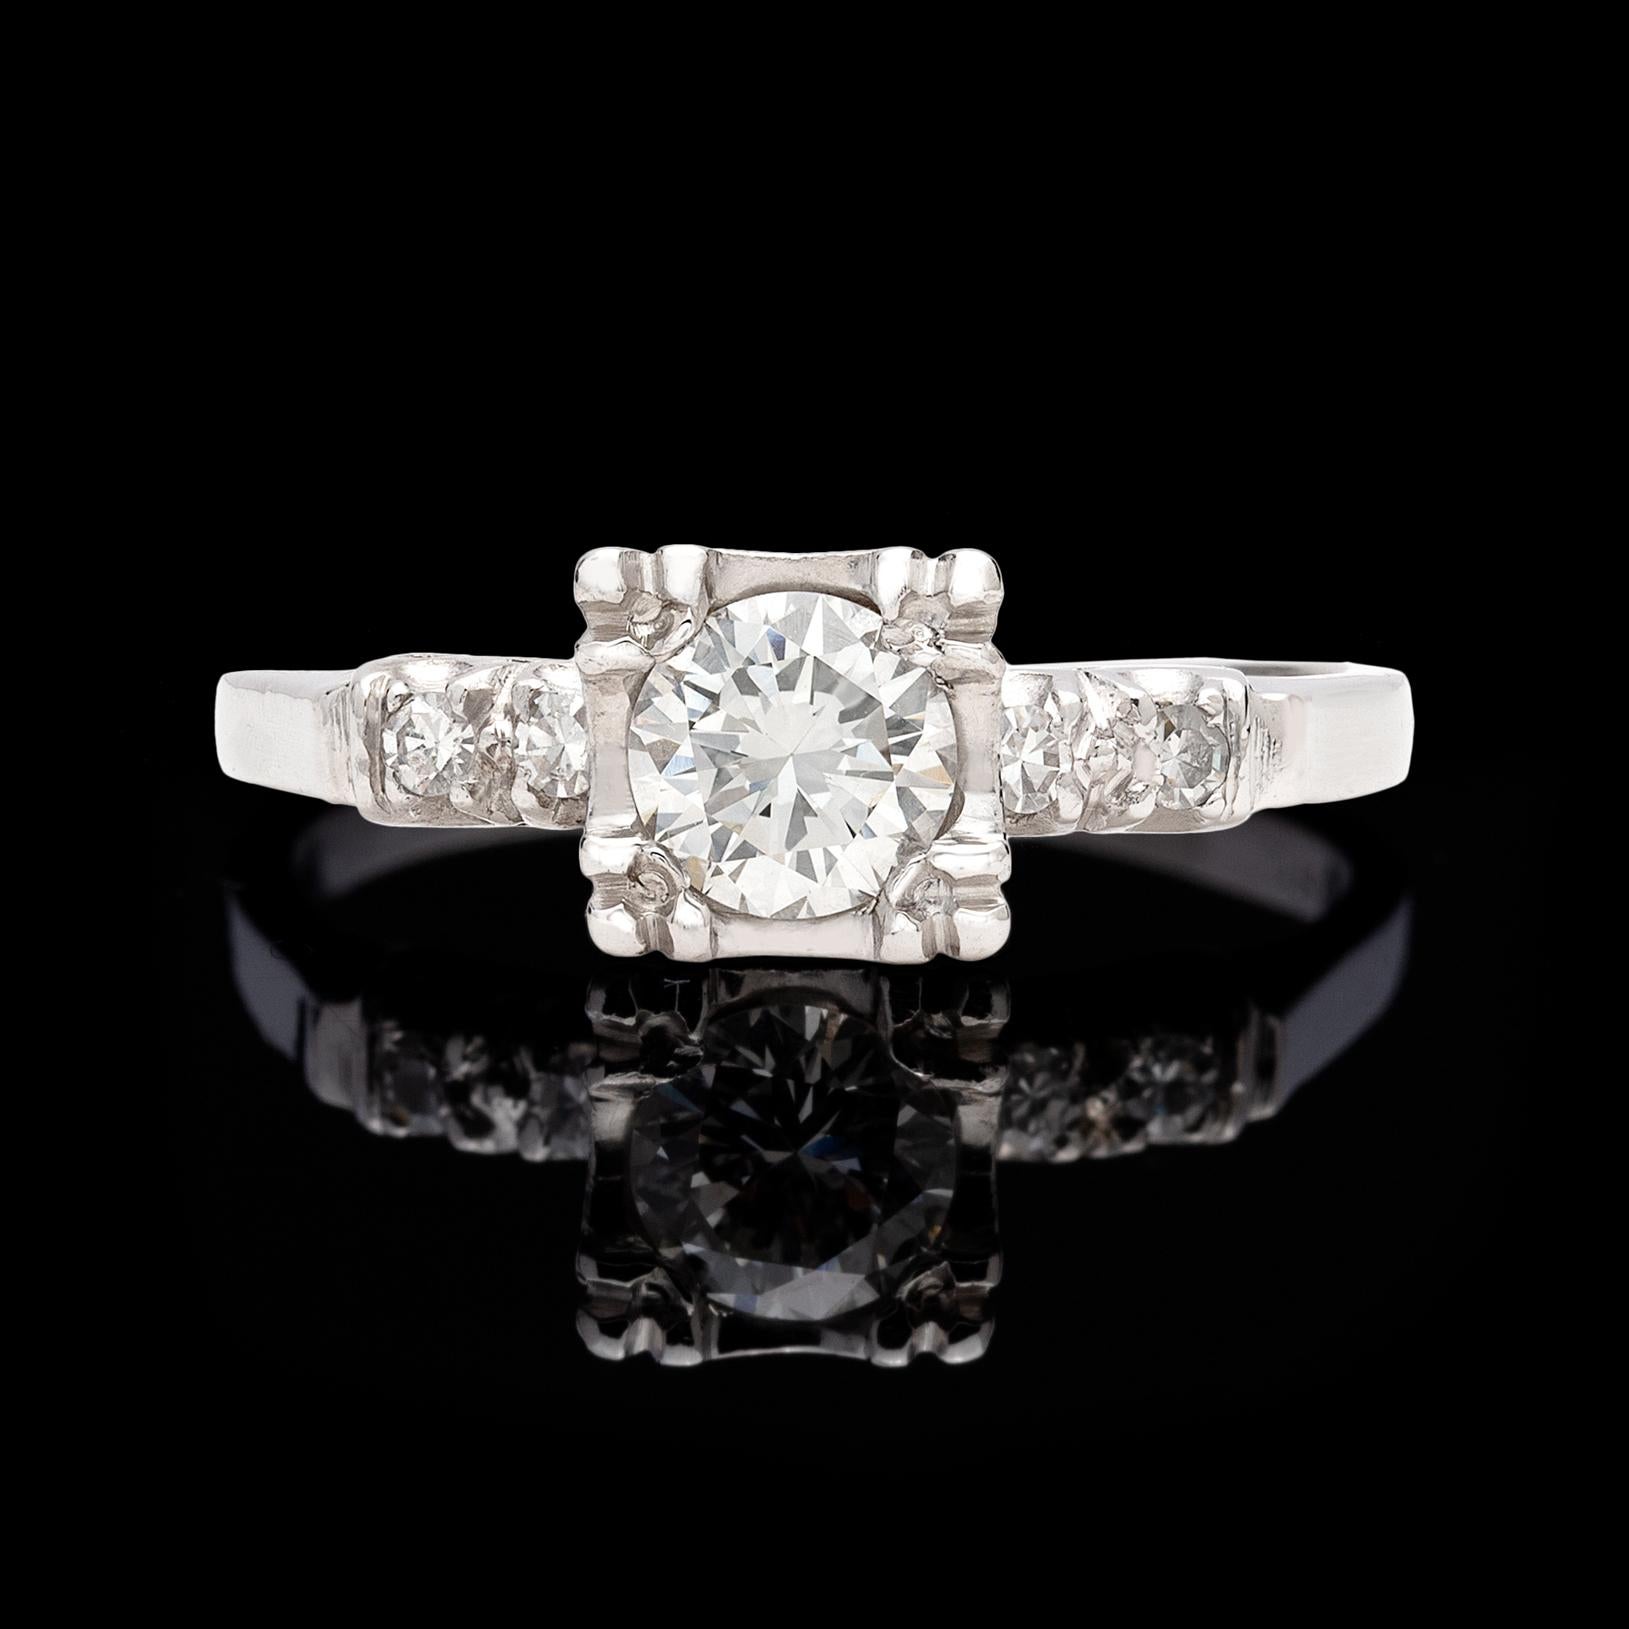 Charming 1950's platinum engagement ring centering a sparkling round brilliant-cut diamonds weighing approximately 0.65 carat, G-H color and VS clarity, set in  square design prongs, with a band accented by 4 single-cut diamonds. Estimated total